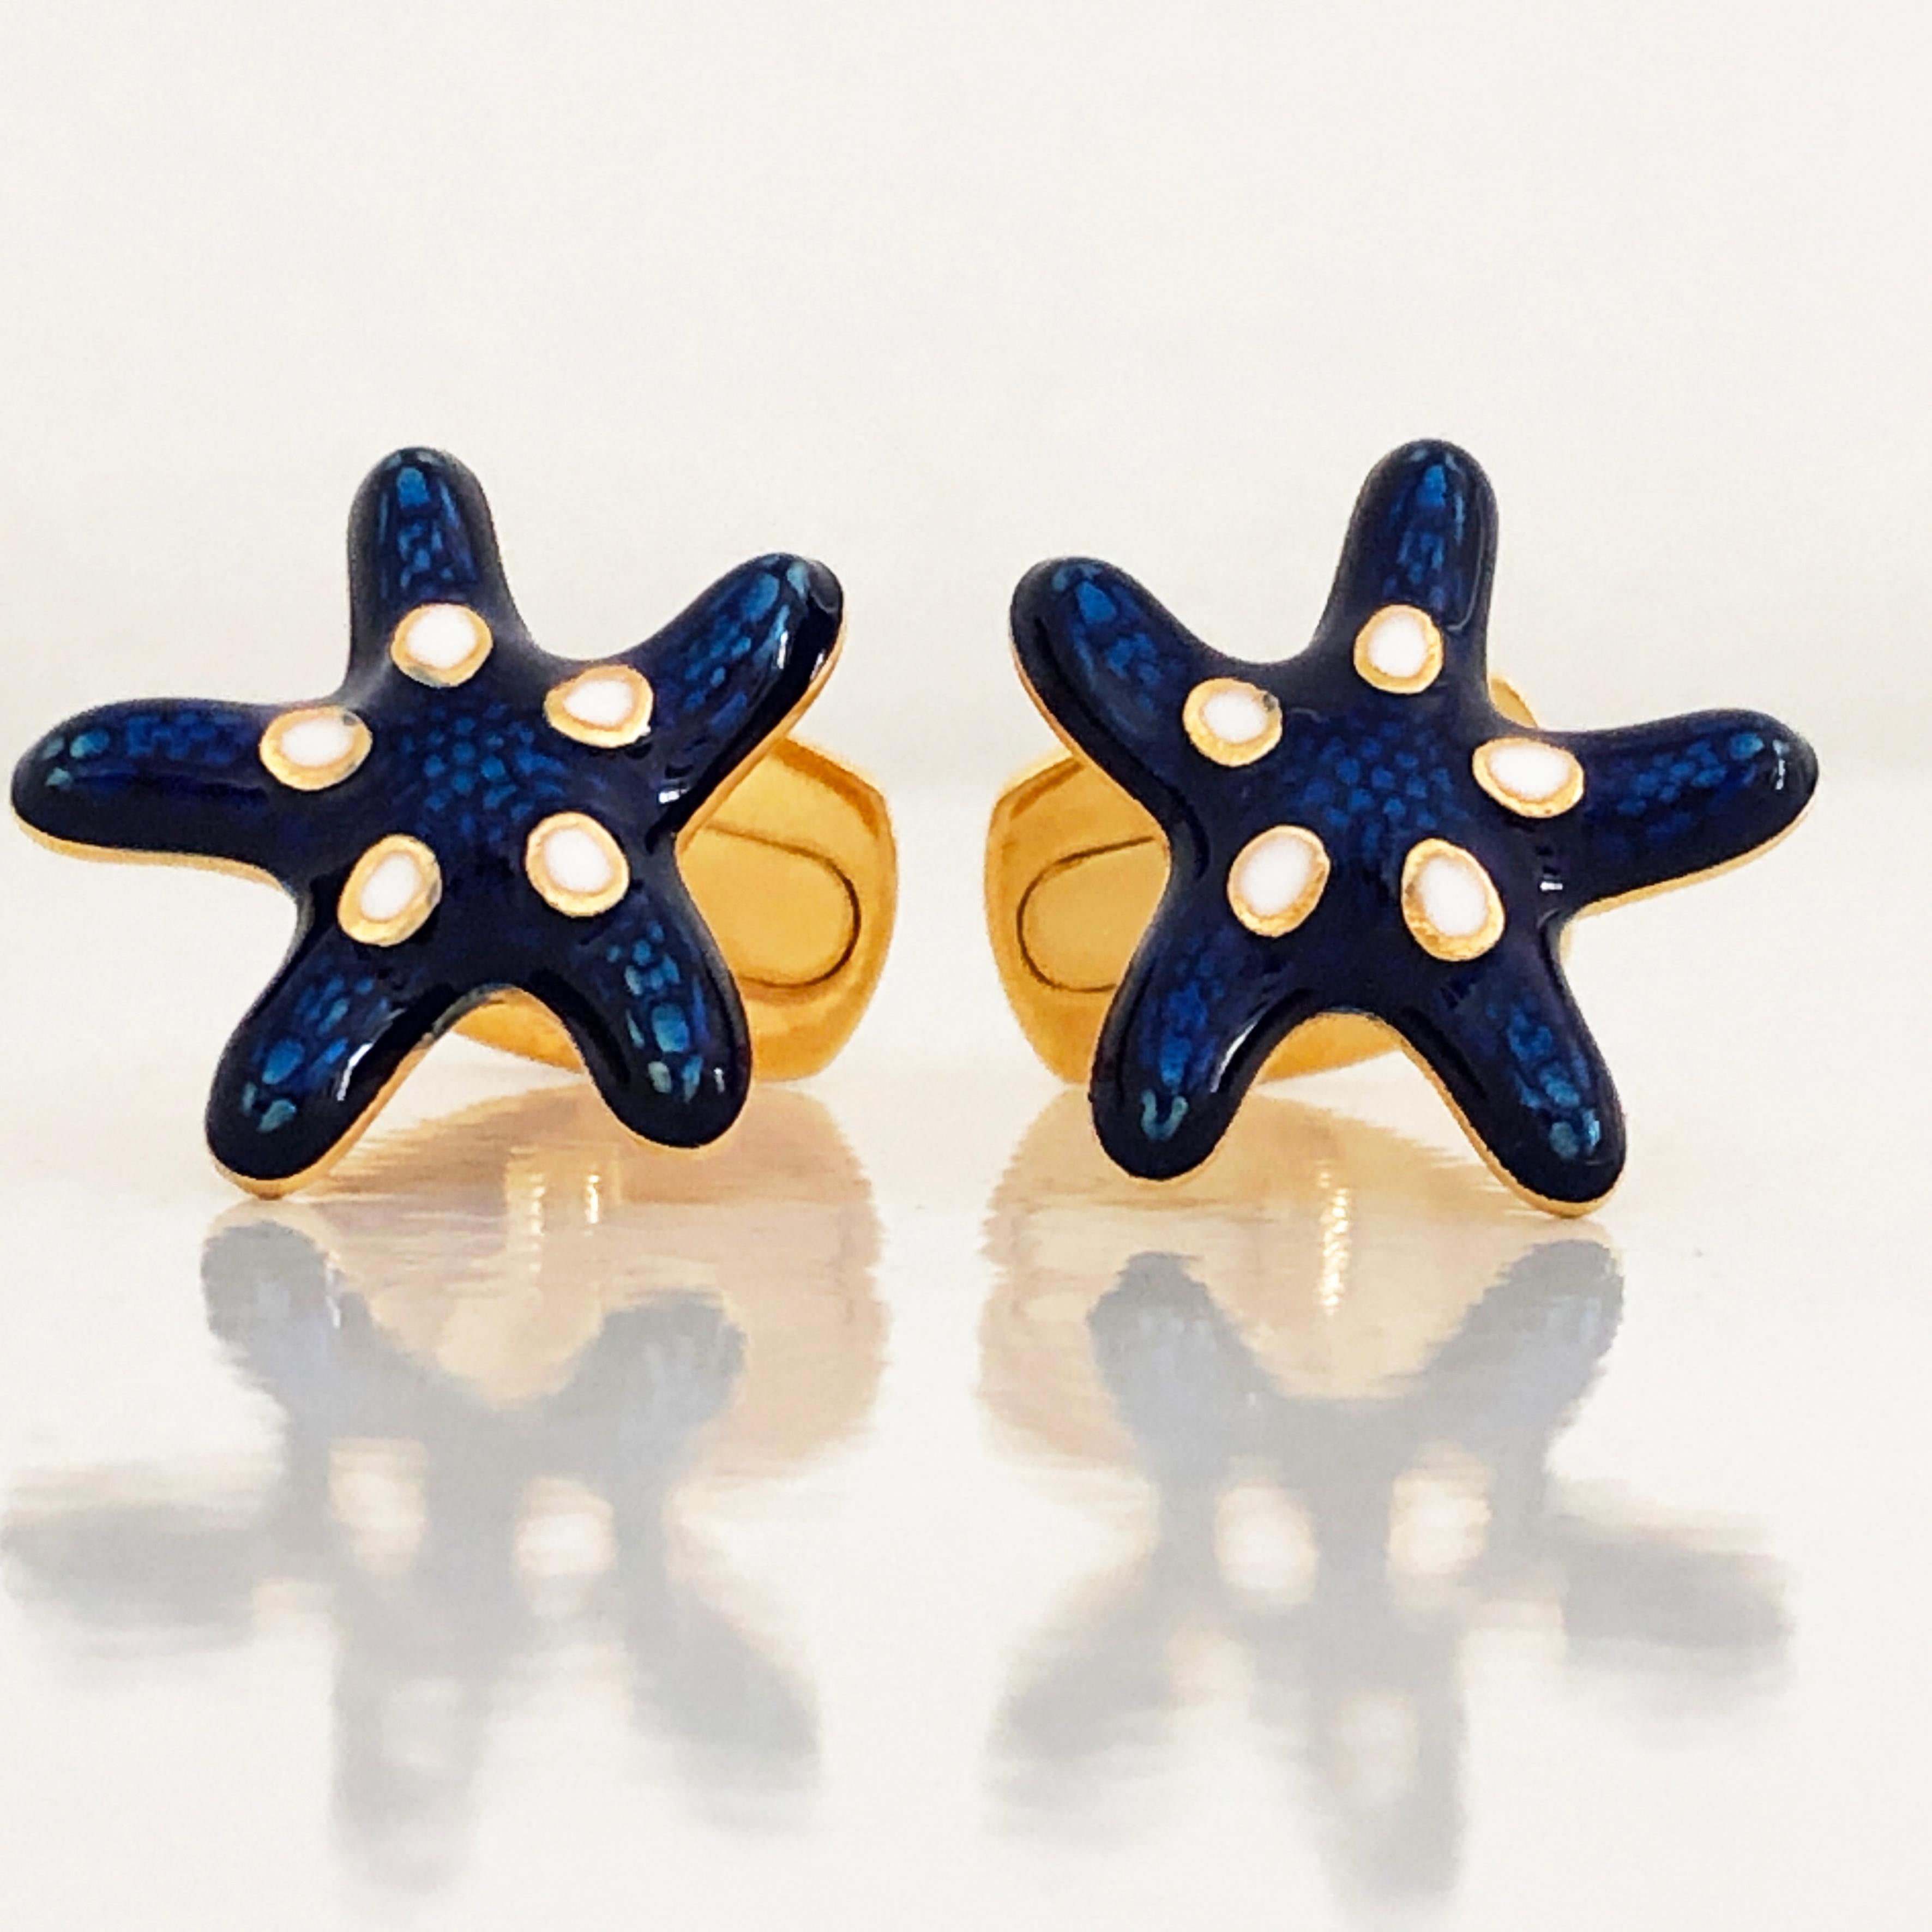 Unique and Chic Navy Blue White Spotted Hand Enamelled Little Starfish Shaped T-Bar Back, Sterling Silver Cufflinks.
In our smart black box.
We offer complimentary express shipping to several destinations

